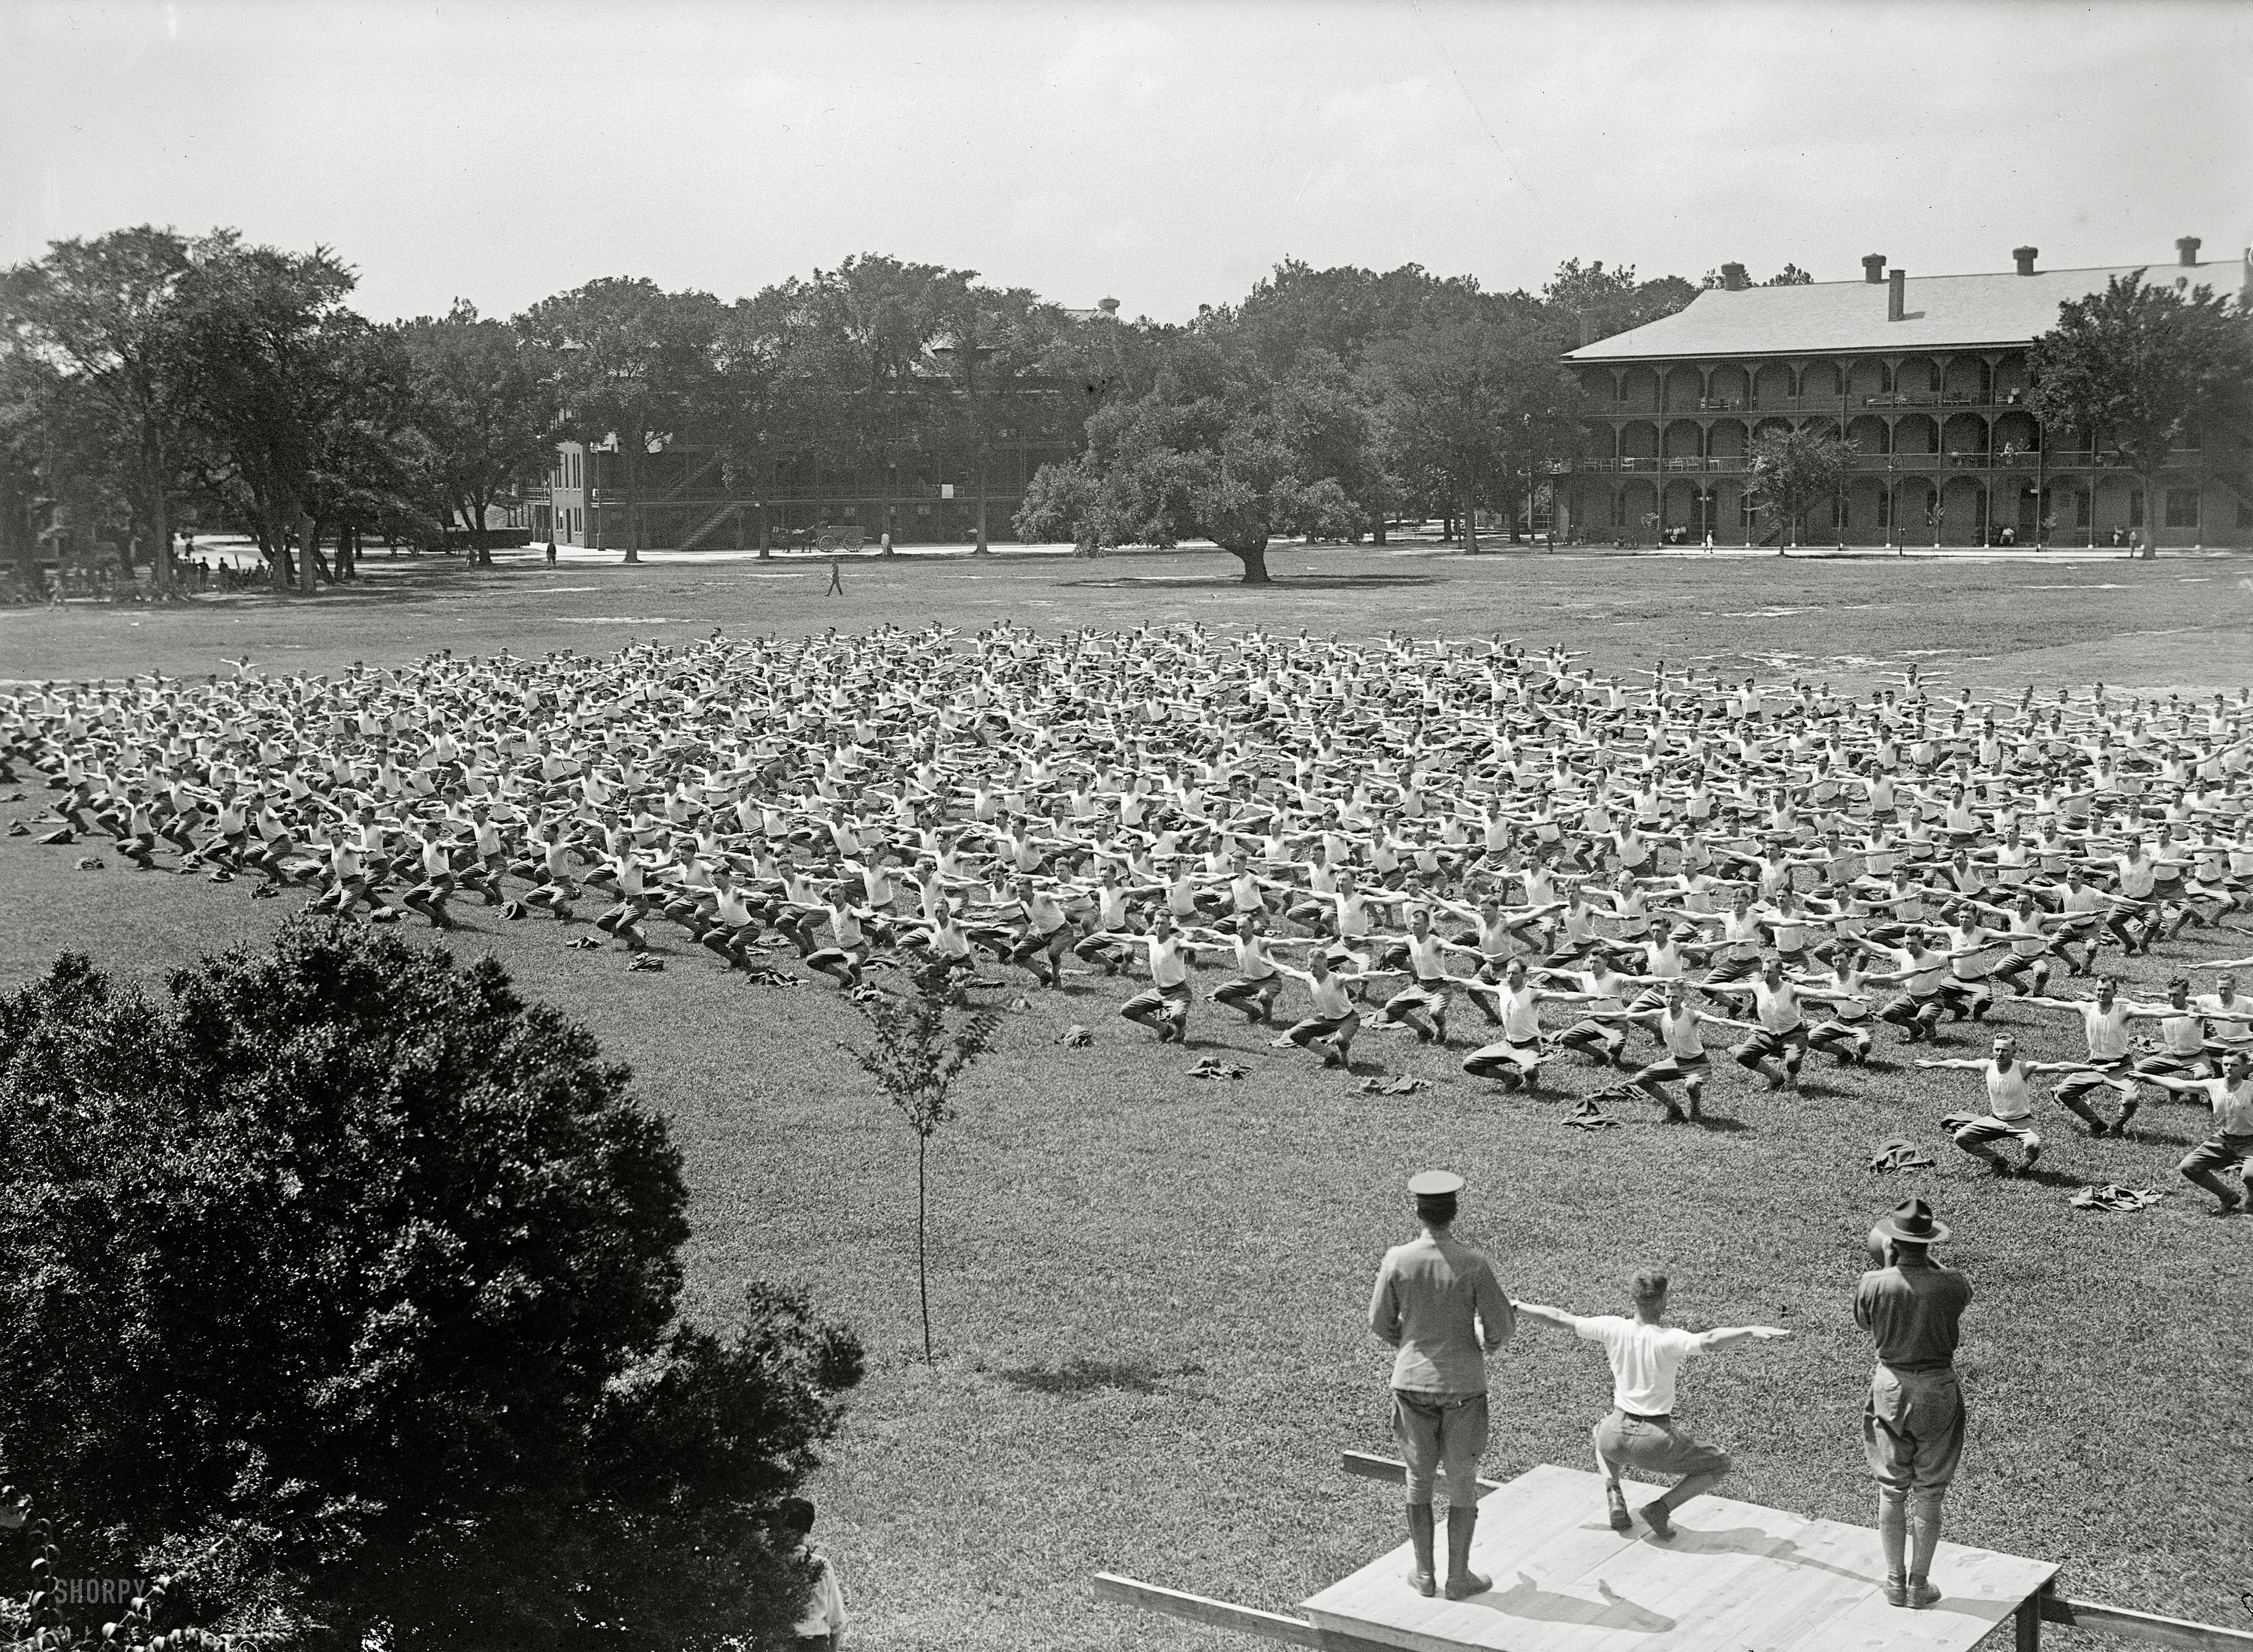 1917 or 1918. "Military training." Harris & Ewing glass negative. View full size.